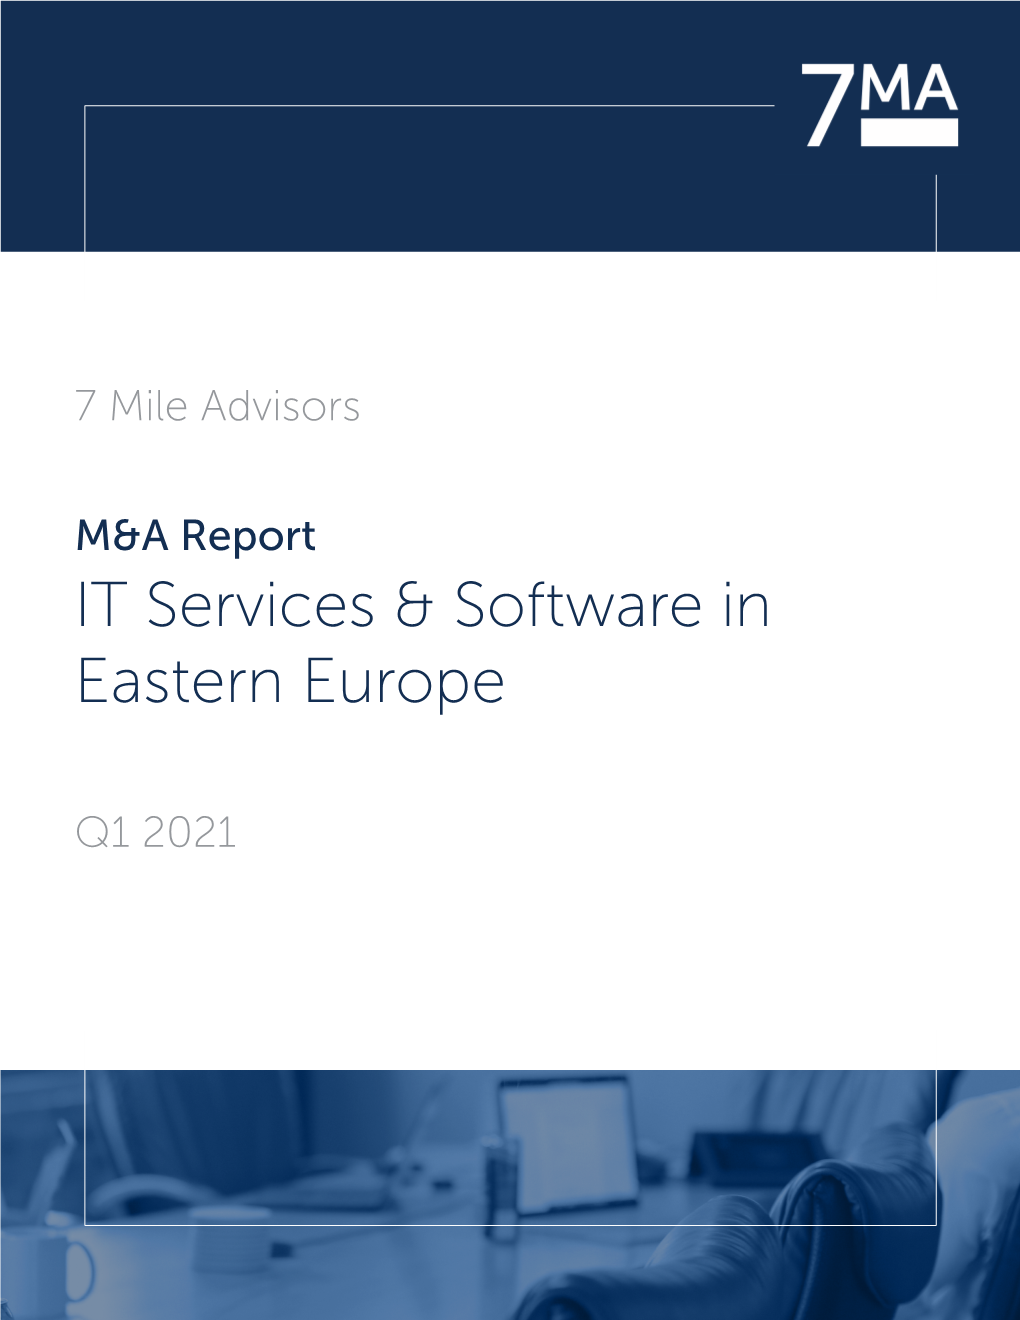 IT Services & Software in Eastern Europe